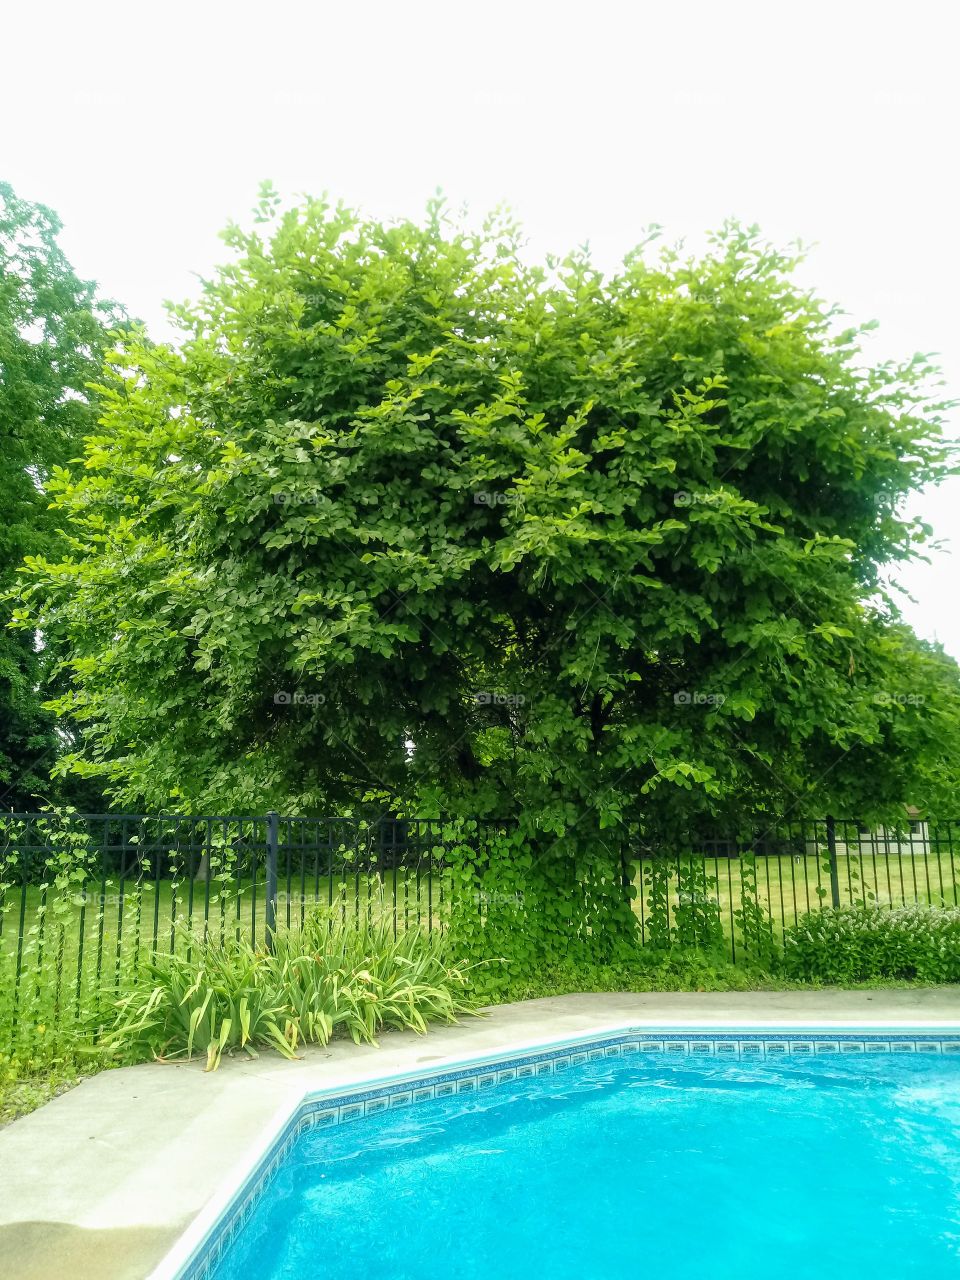 I've always loved this big, beautiful tree next to our pool.